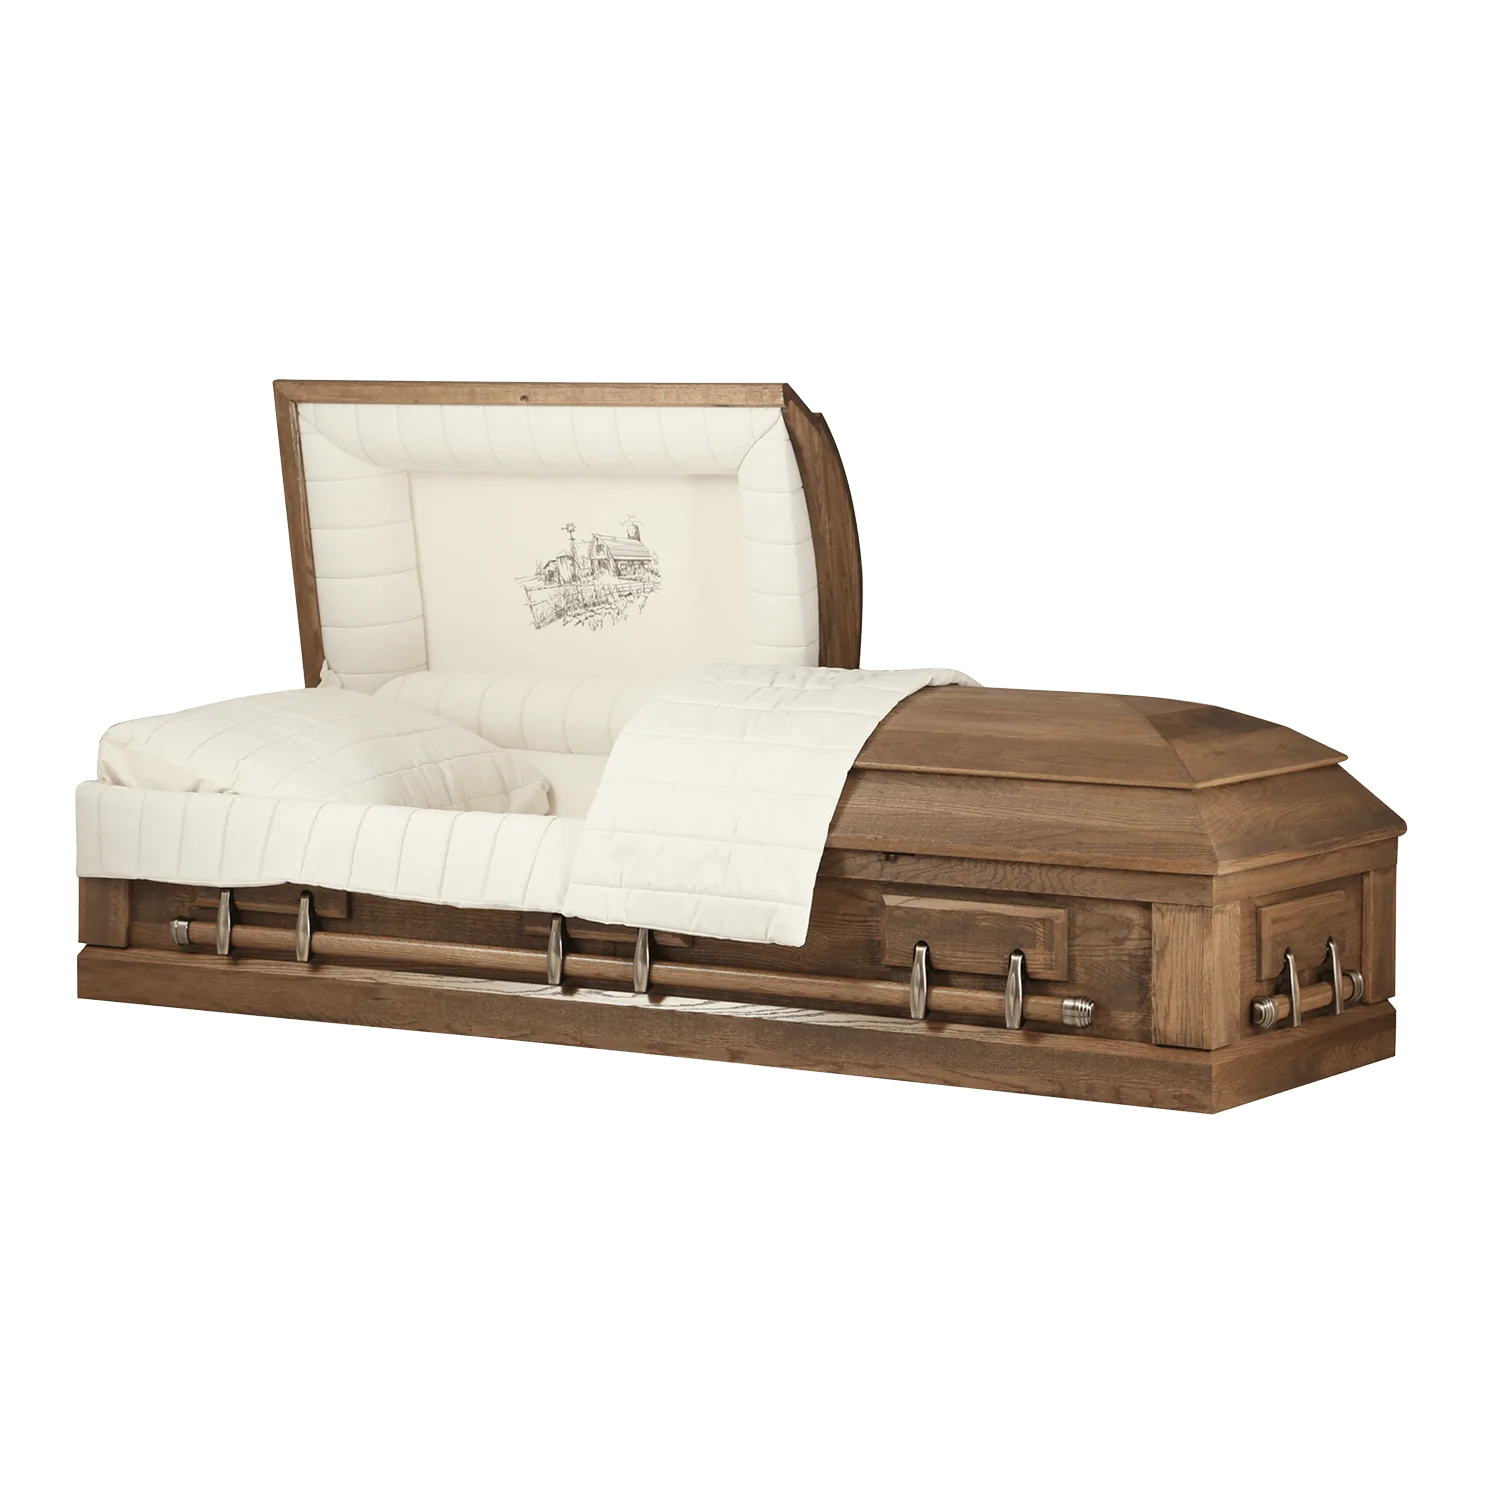 All about Oak Casket - Price, Types and Where to Buy